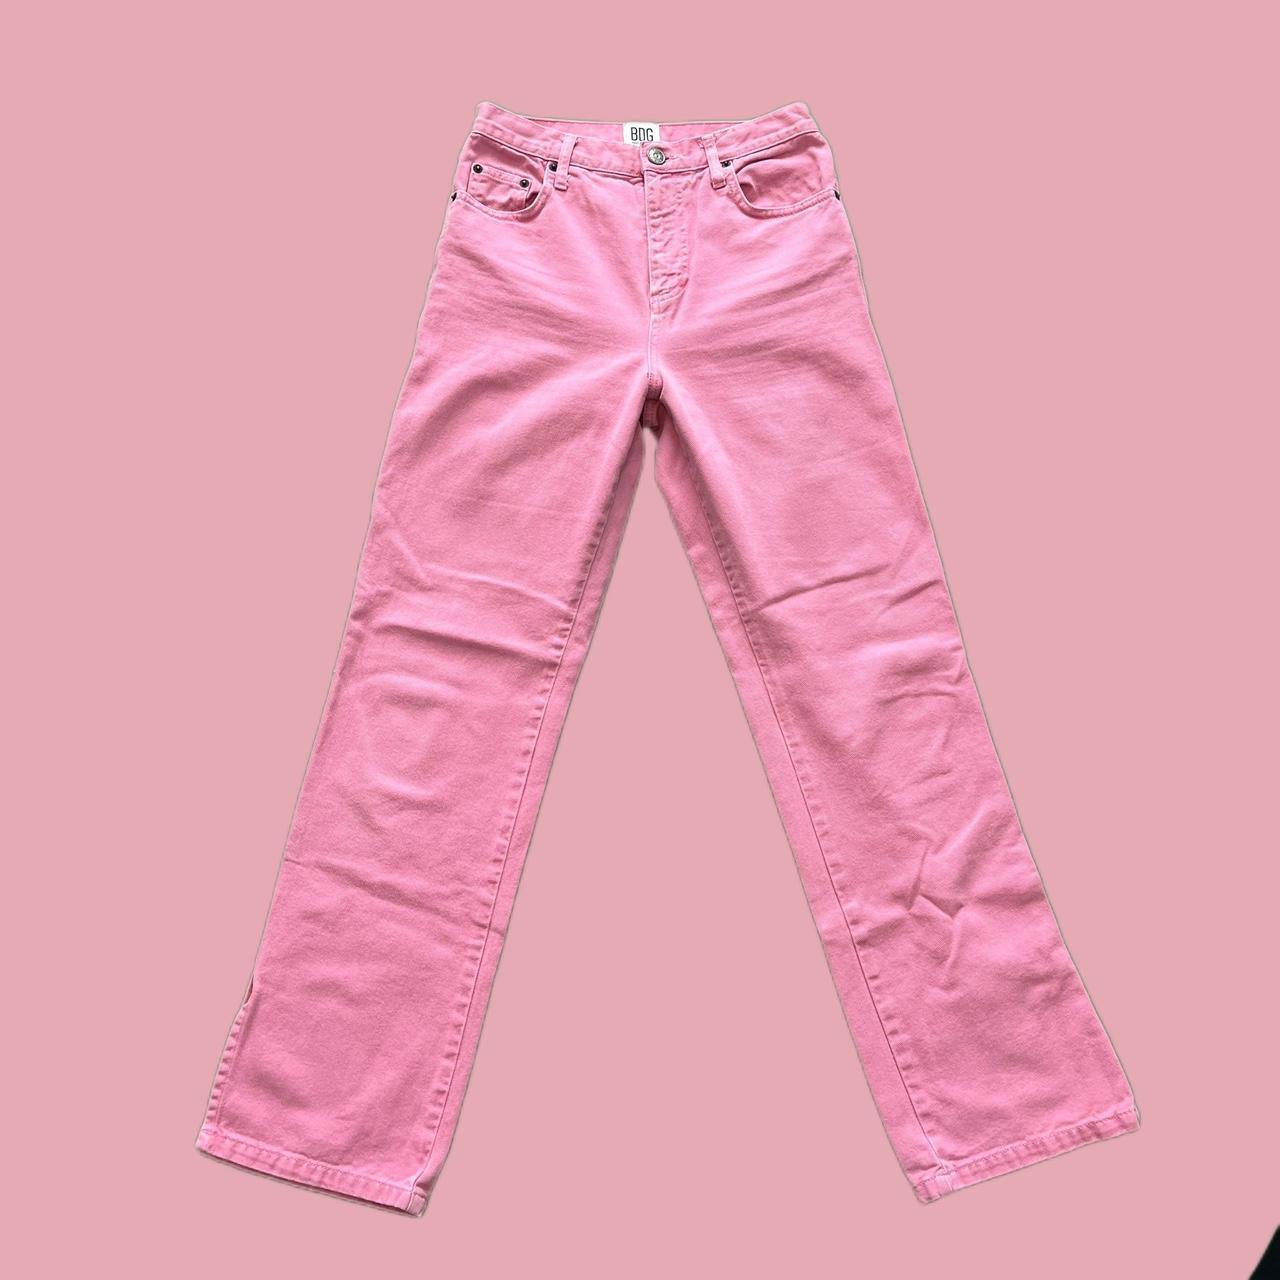 Urban Outfitters Pink BDG Jeans Womens - Size... - Depop